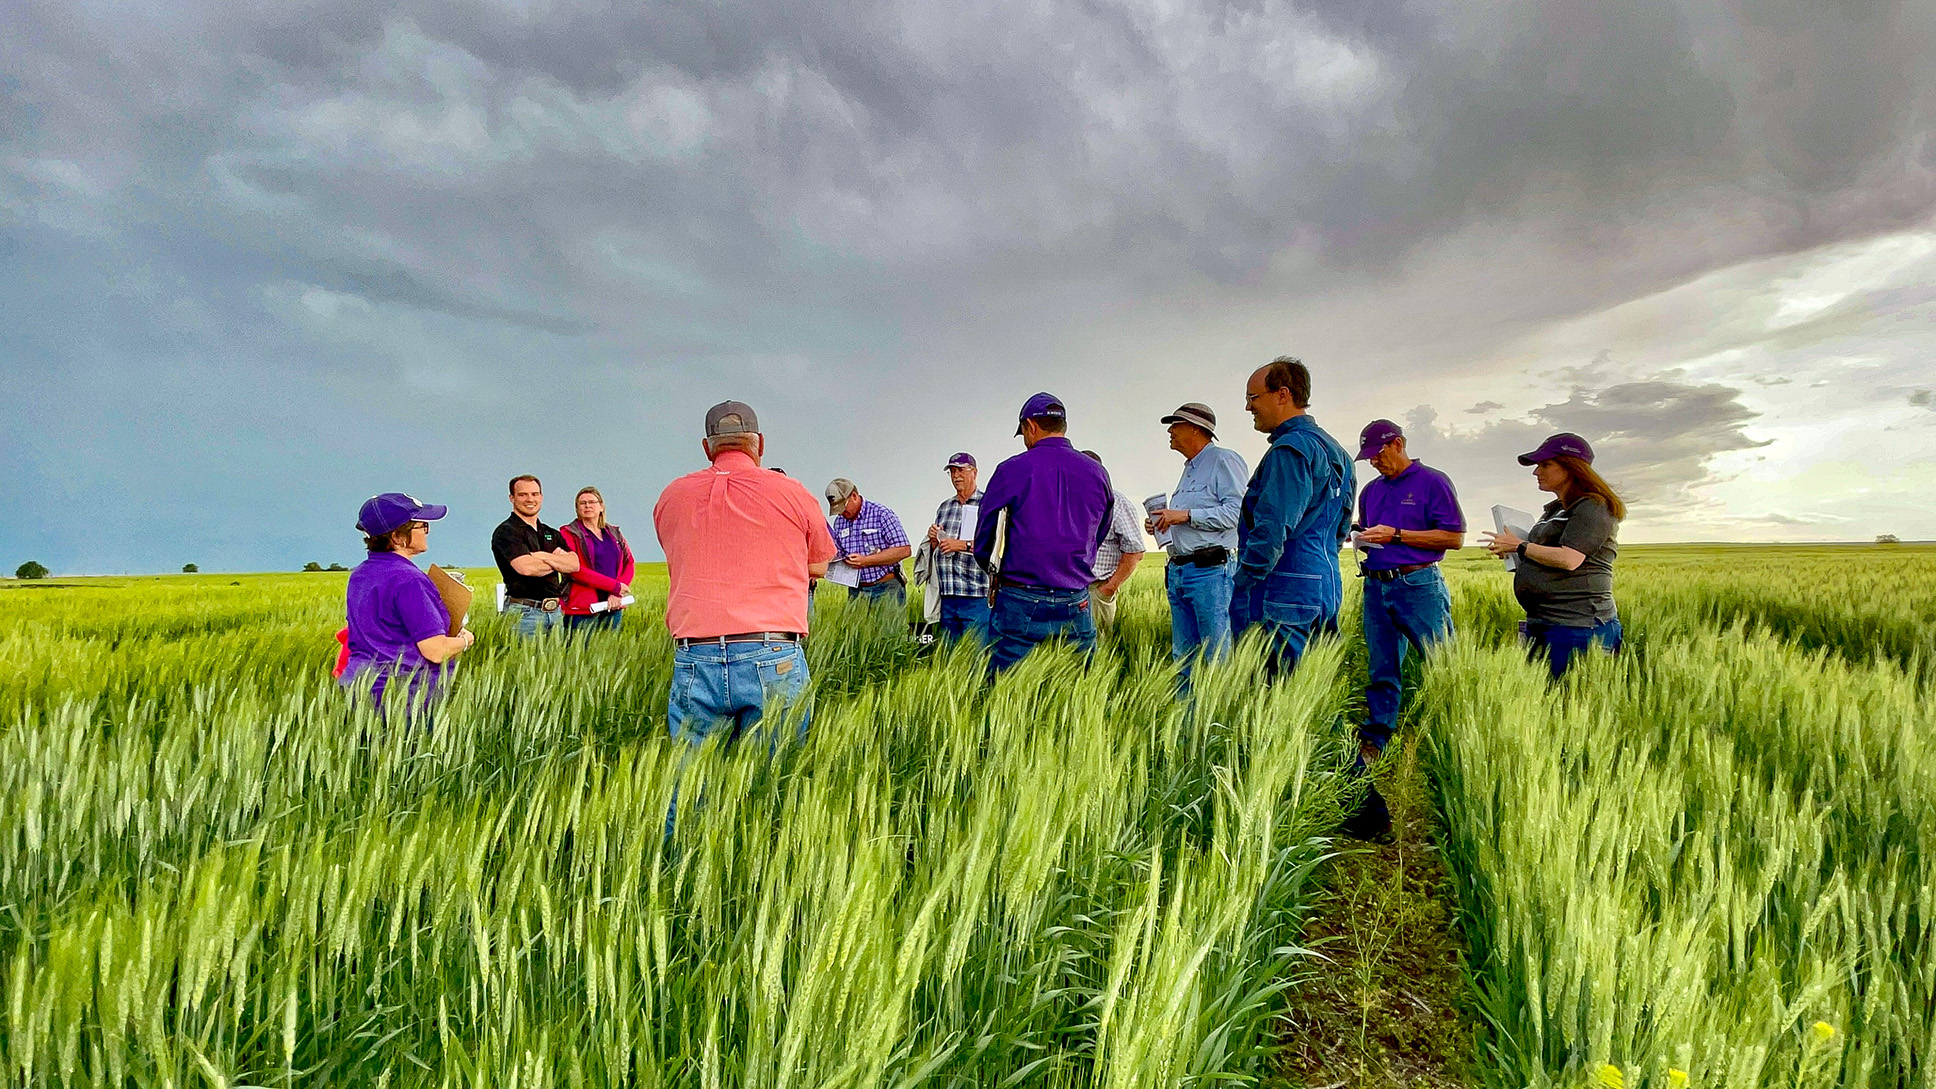 Extension specialists discussing wheat growth in a headed green wheat field